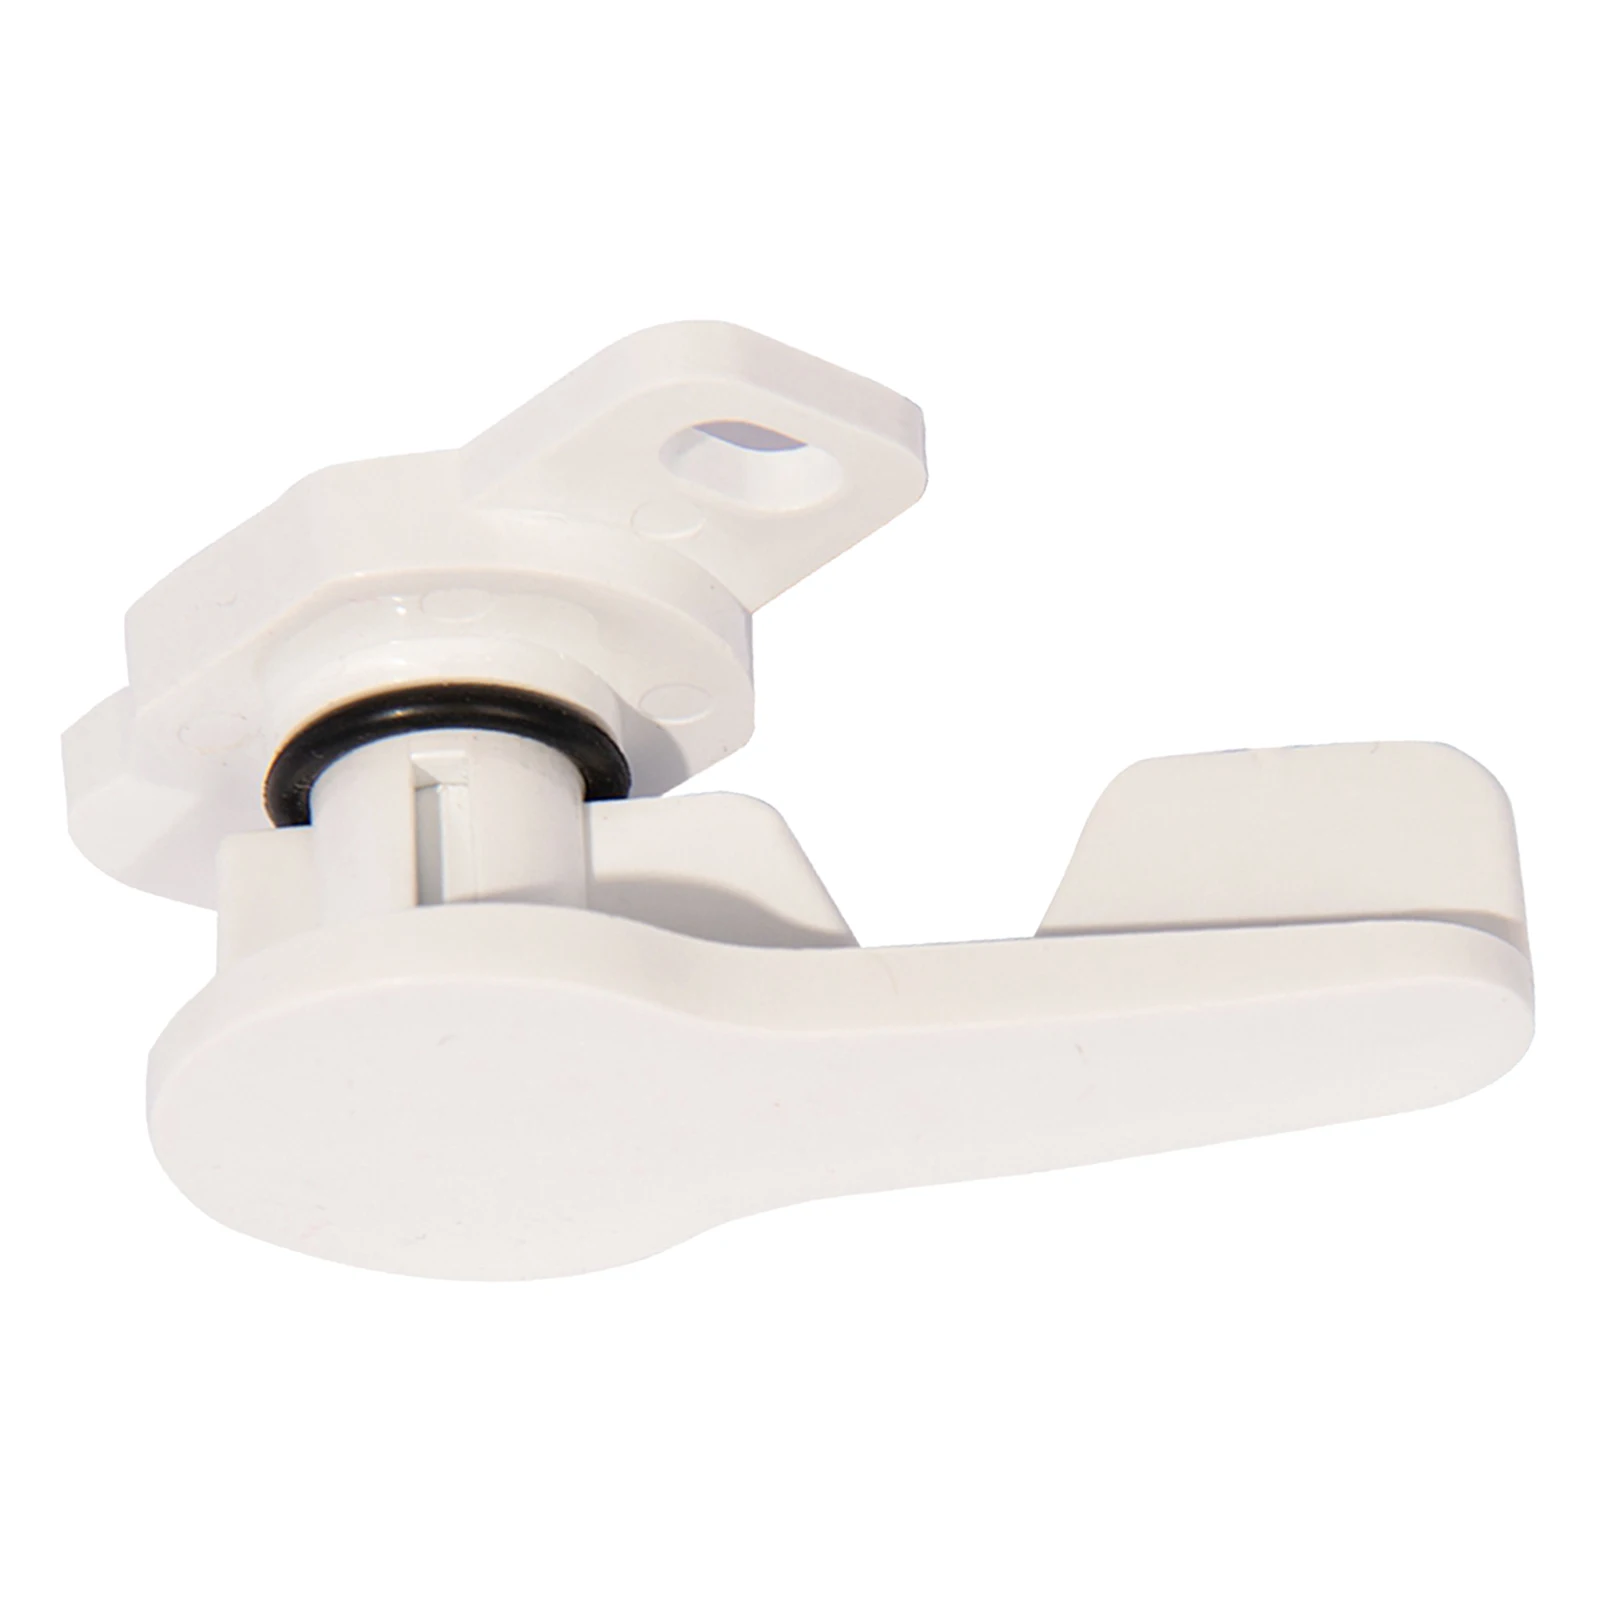 Latch for Marine Engine Room, Manhole Cover, Hatch Cover, Deck Cover, Access Cover, White Boat Accessories, ABS Plastic